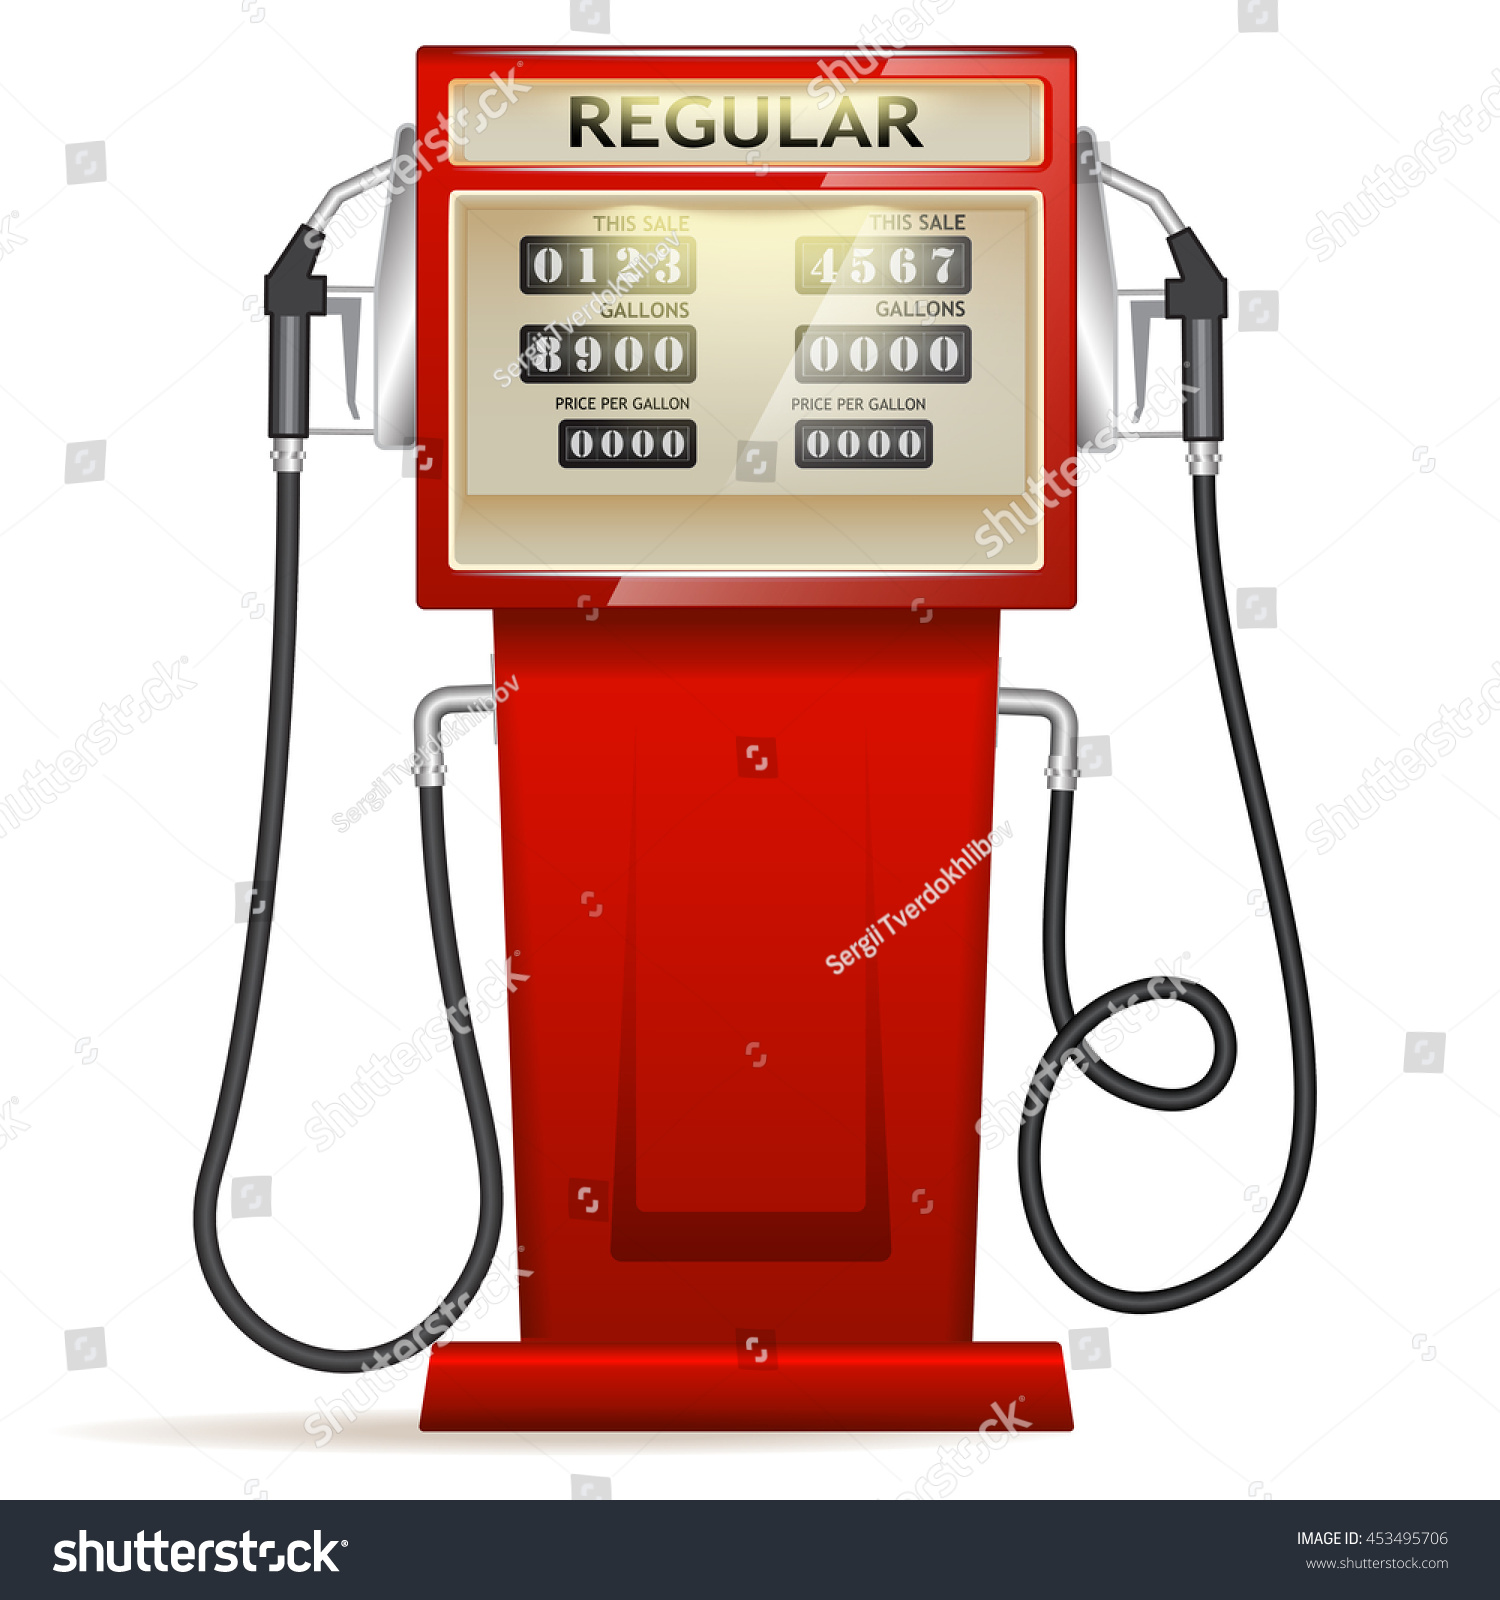 2,371 Old gas pump with hose Images, Stock Photos & Vectors | Shutterstock